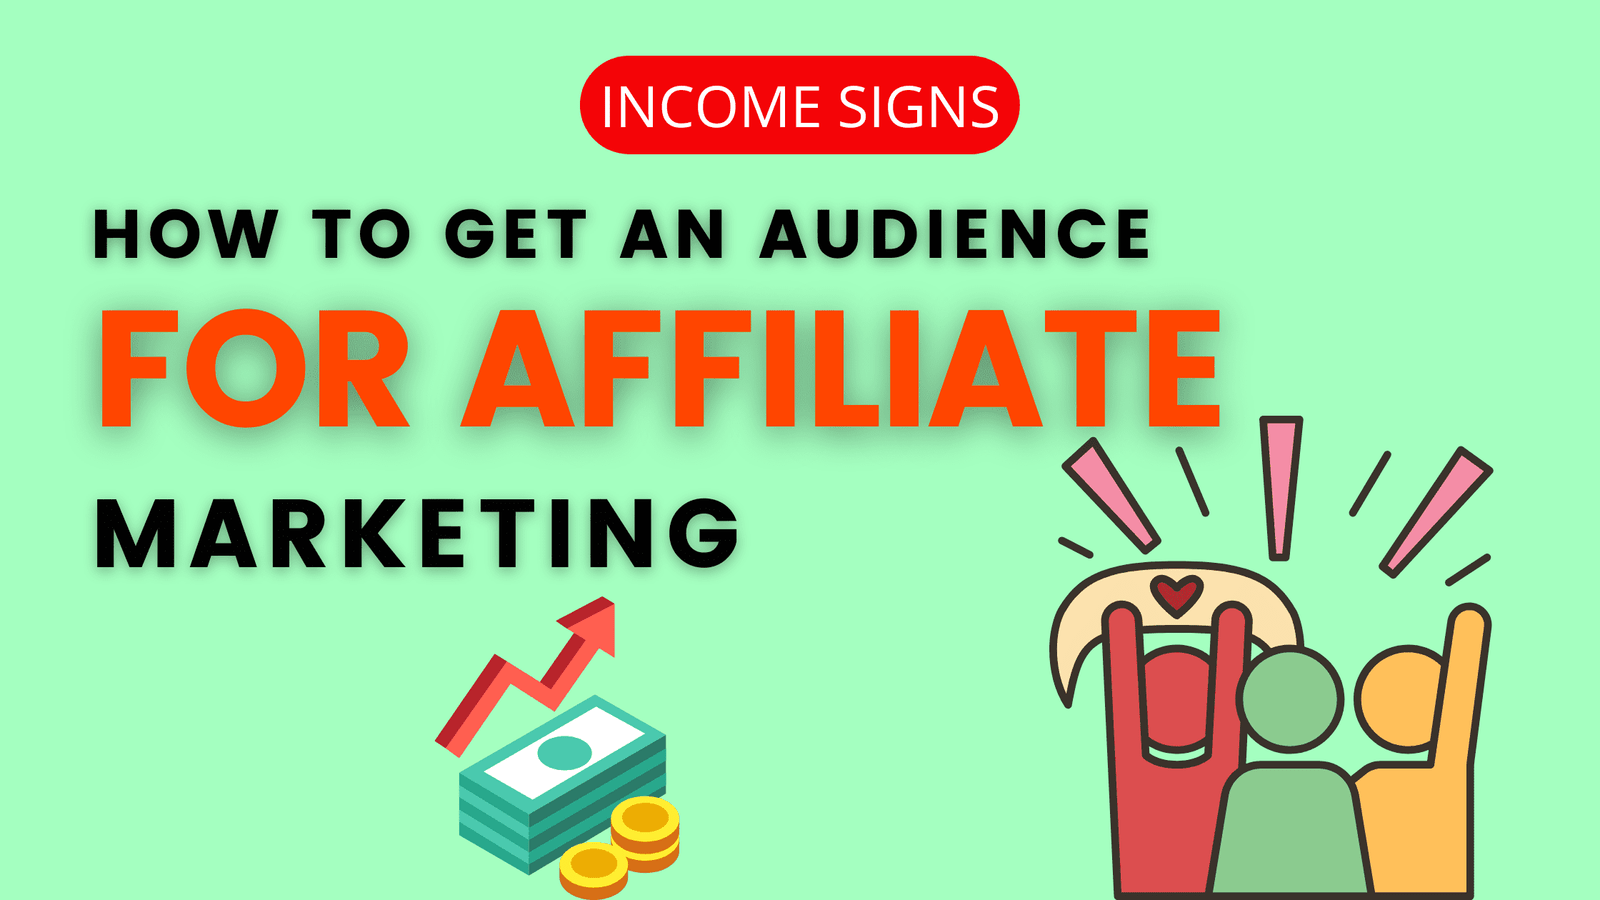 How to Get an Audience for Affiliate Marketing and Do it Properly